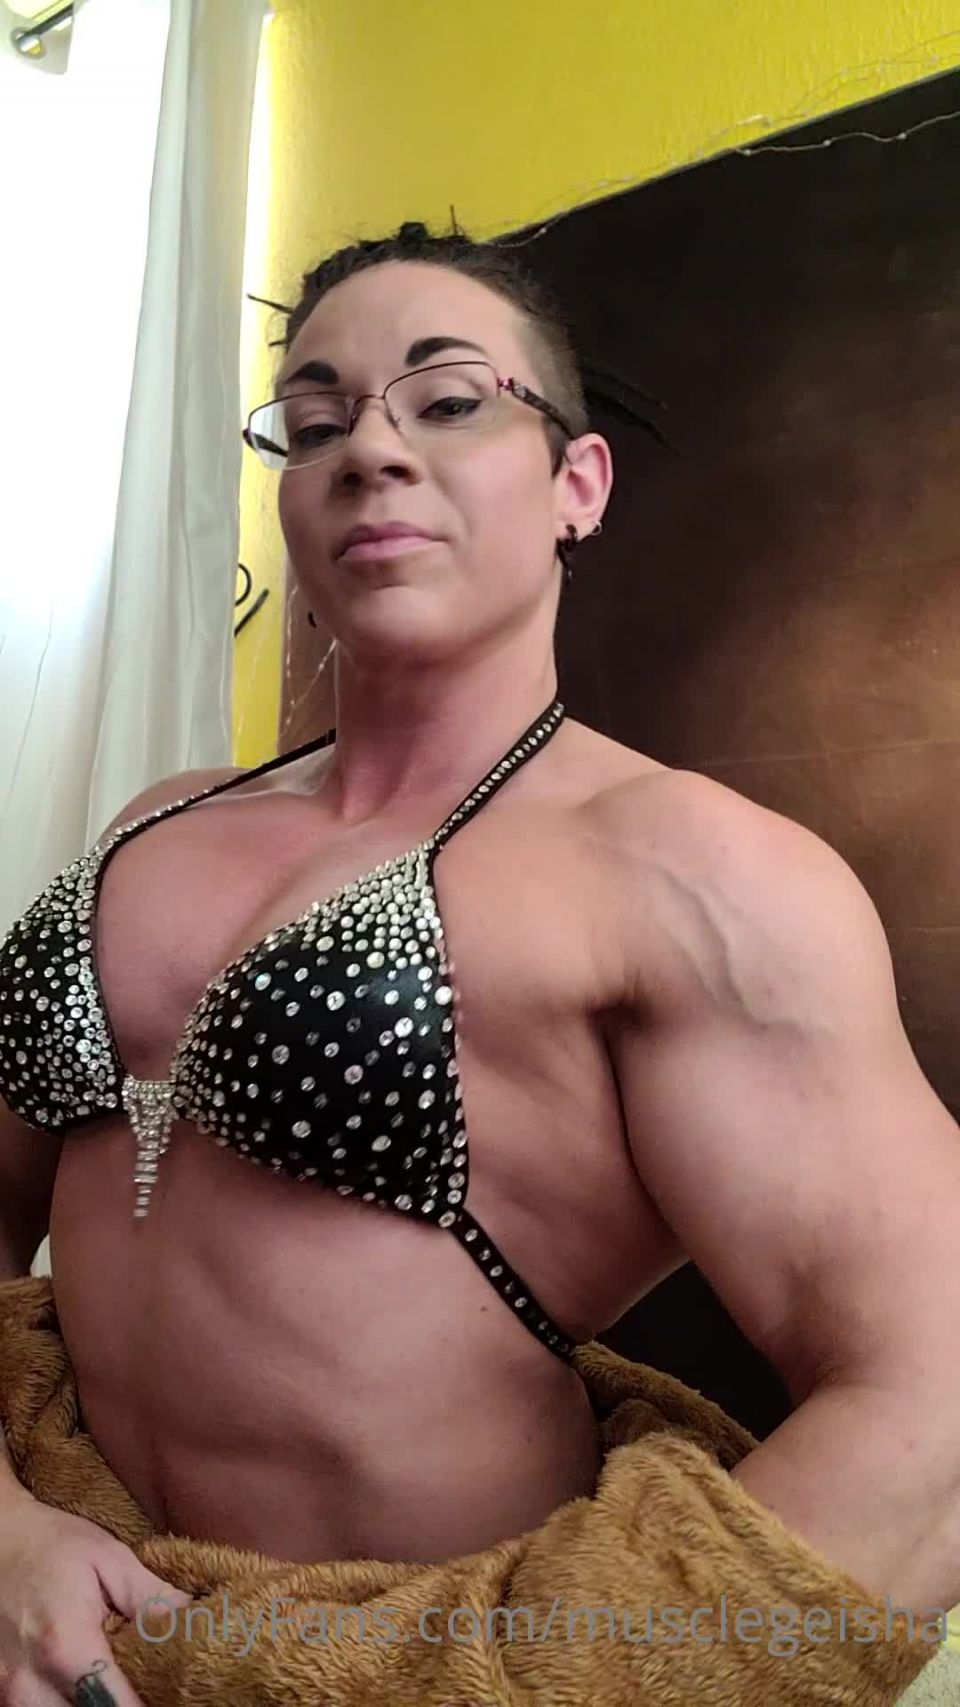 MuscleGeisha () Musclegeisha - the update my entire athletic career ive wanted to get on a flight to train under one of 06-01-2022